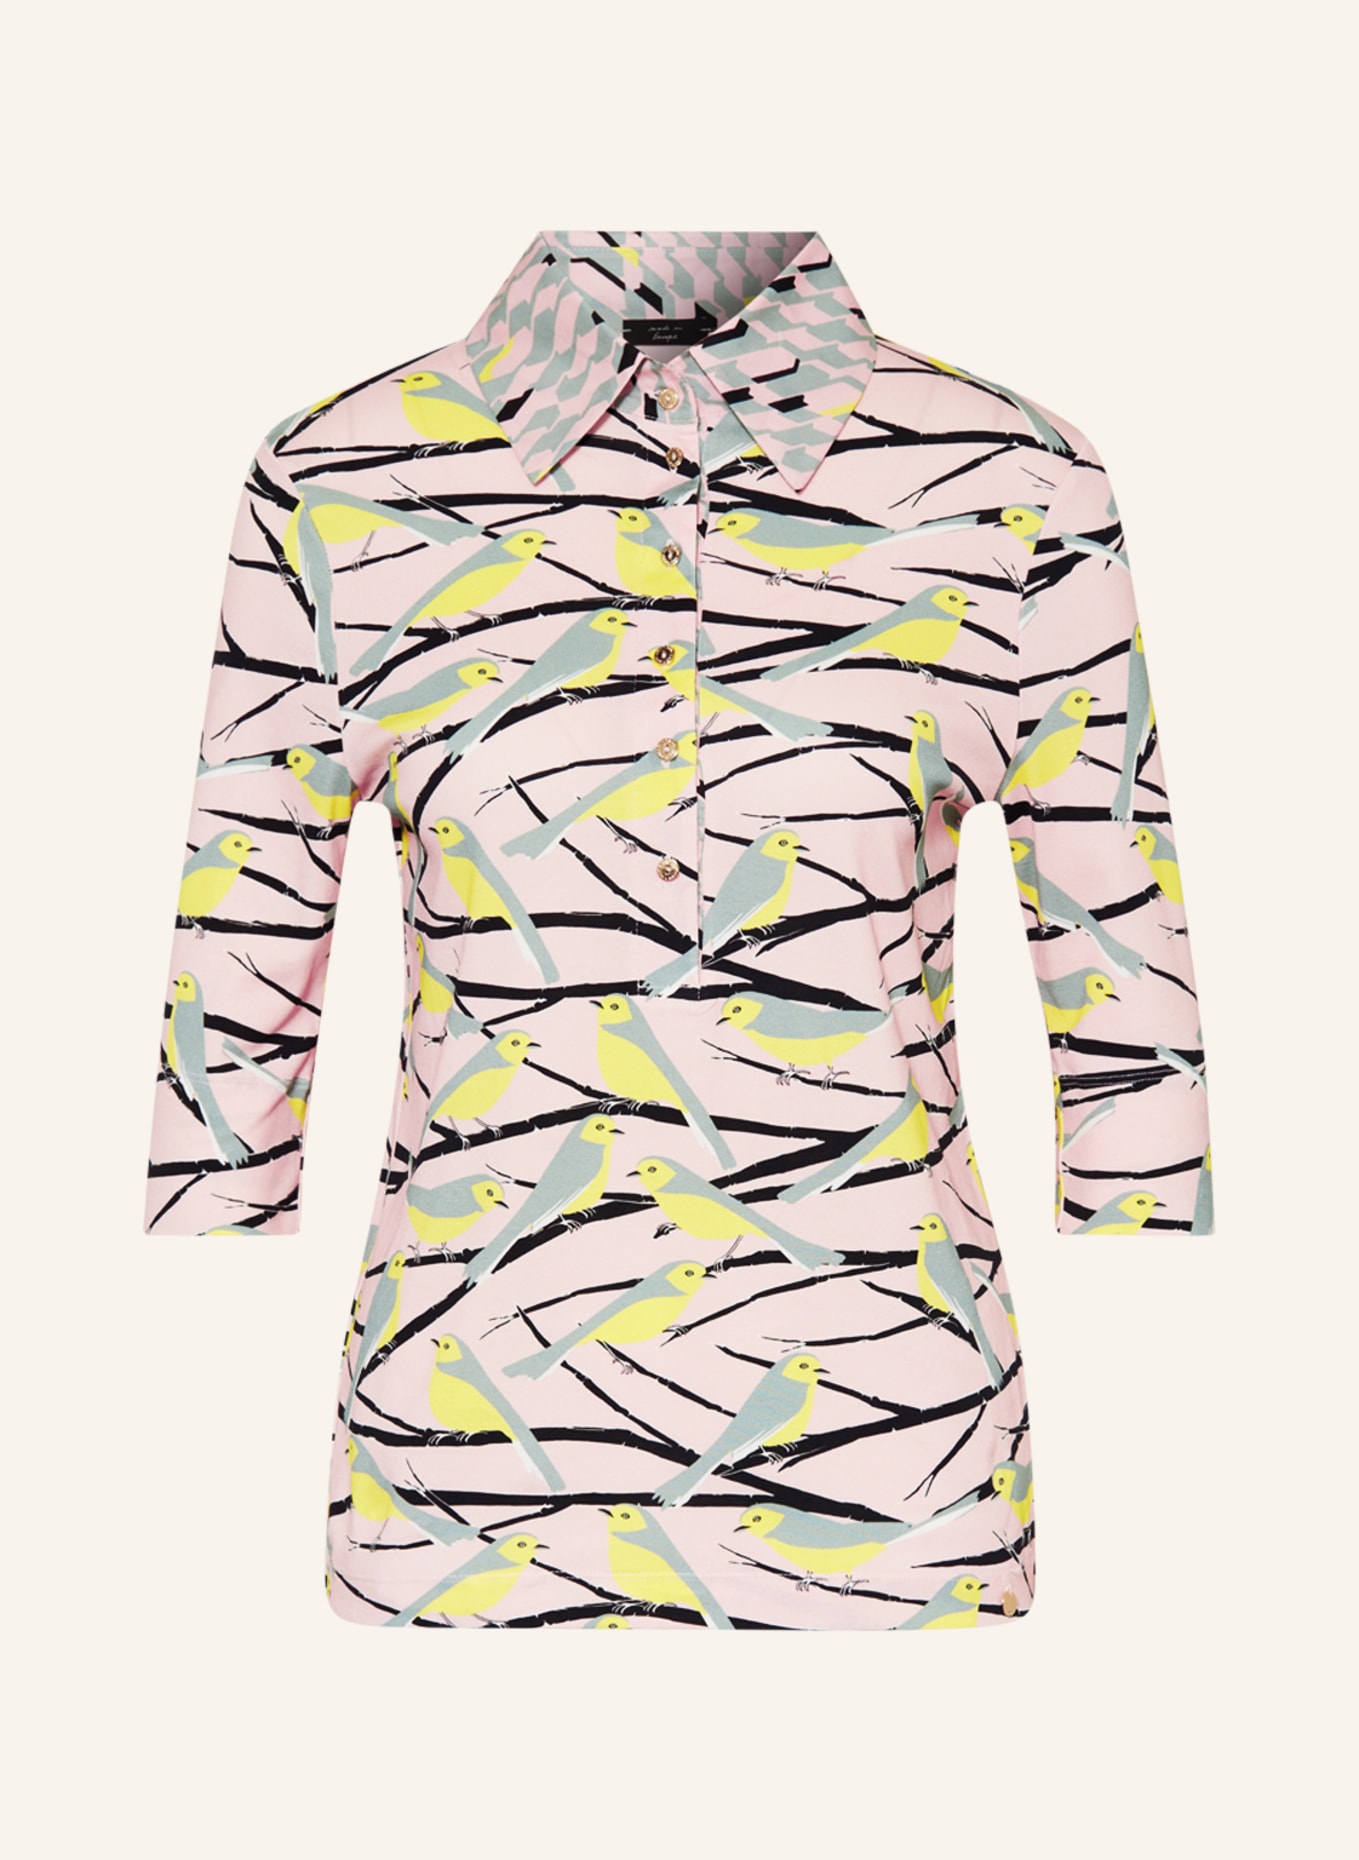 MARC CAIN yellow/ polo blue Jersey shirt in pink/ gray light